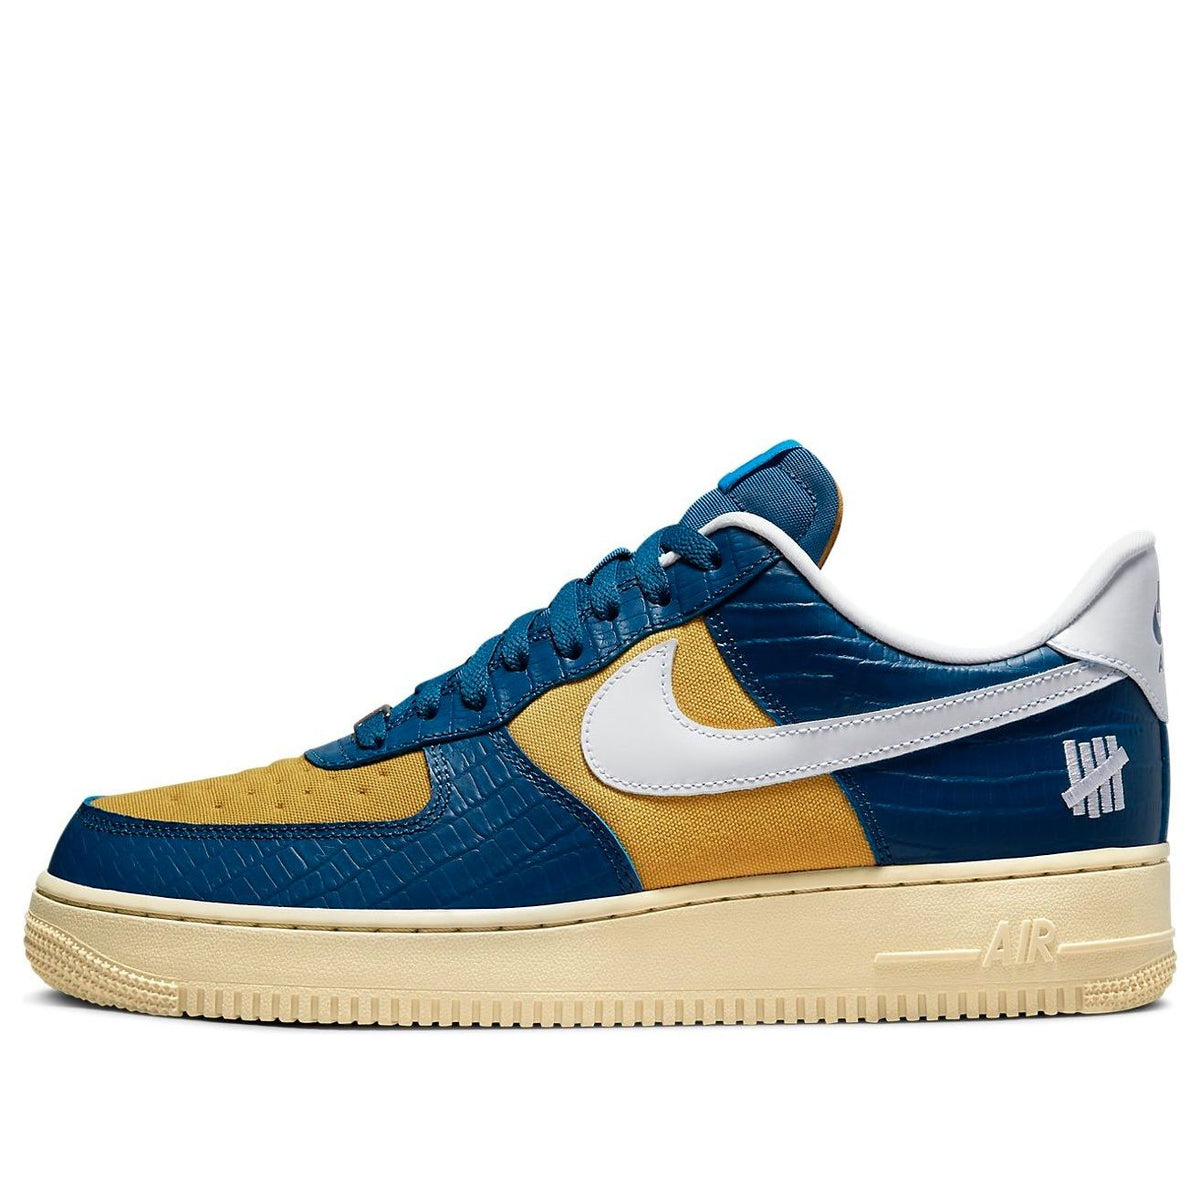 Nike Undefeated x Air Force 1 Low SP 'Dunk vs AF1' DM8462-400 - KICKS CREW